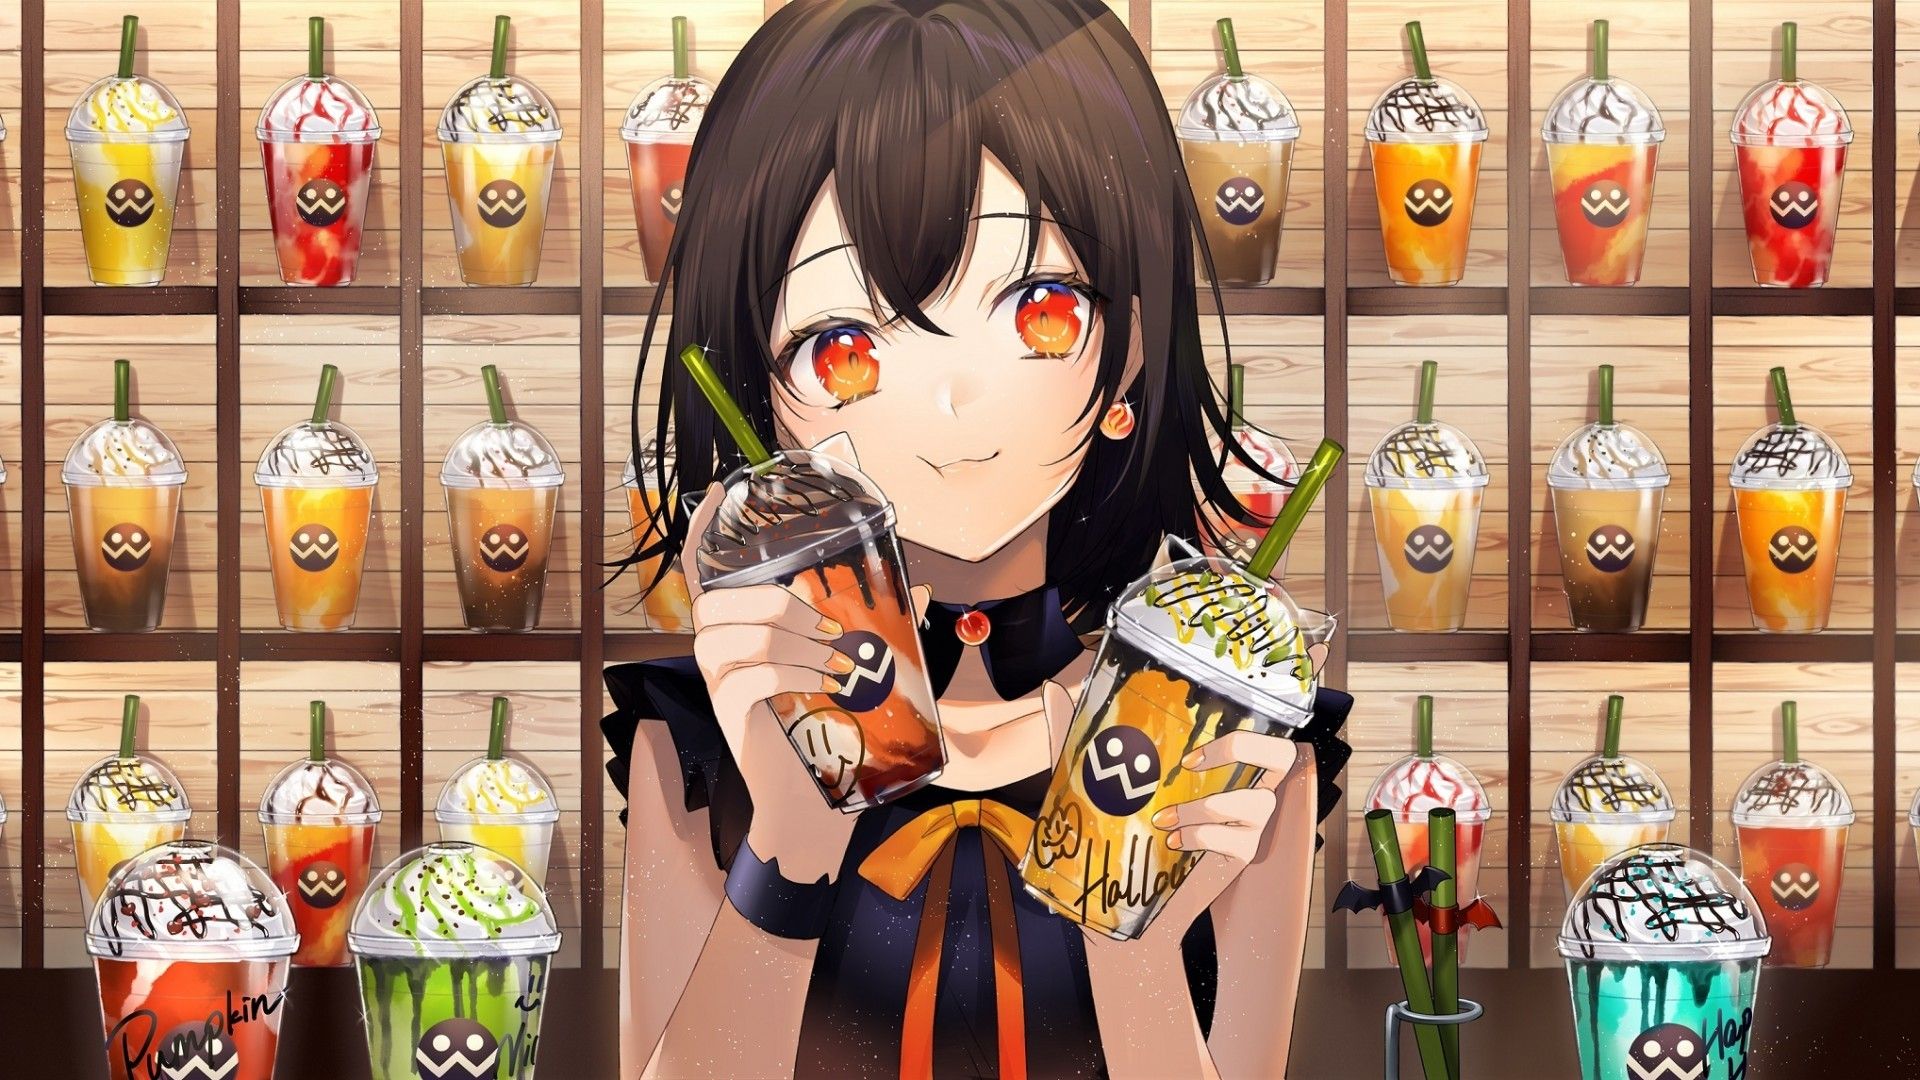 Cute Anime Girls Drinking Coffee Wallpapers - Wallpaper Cave